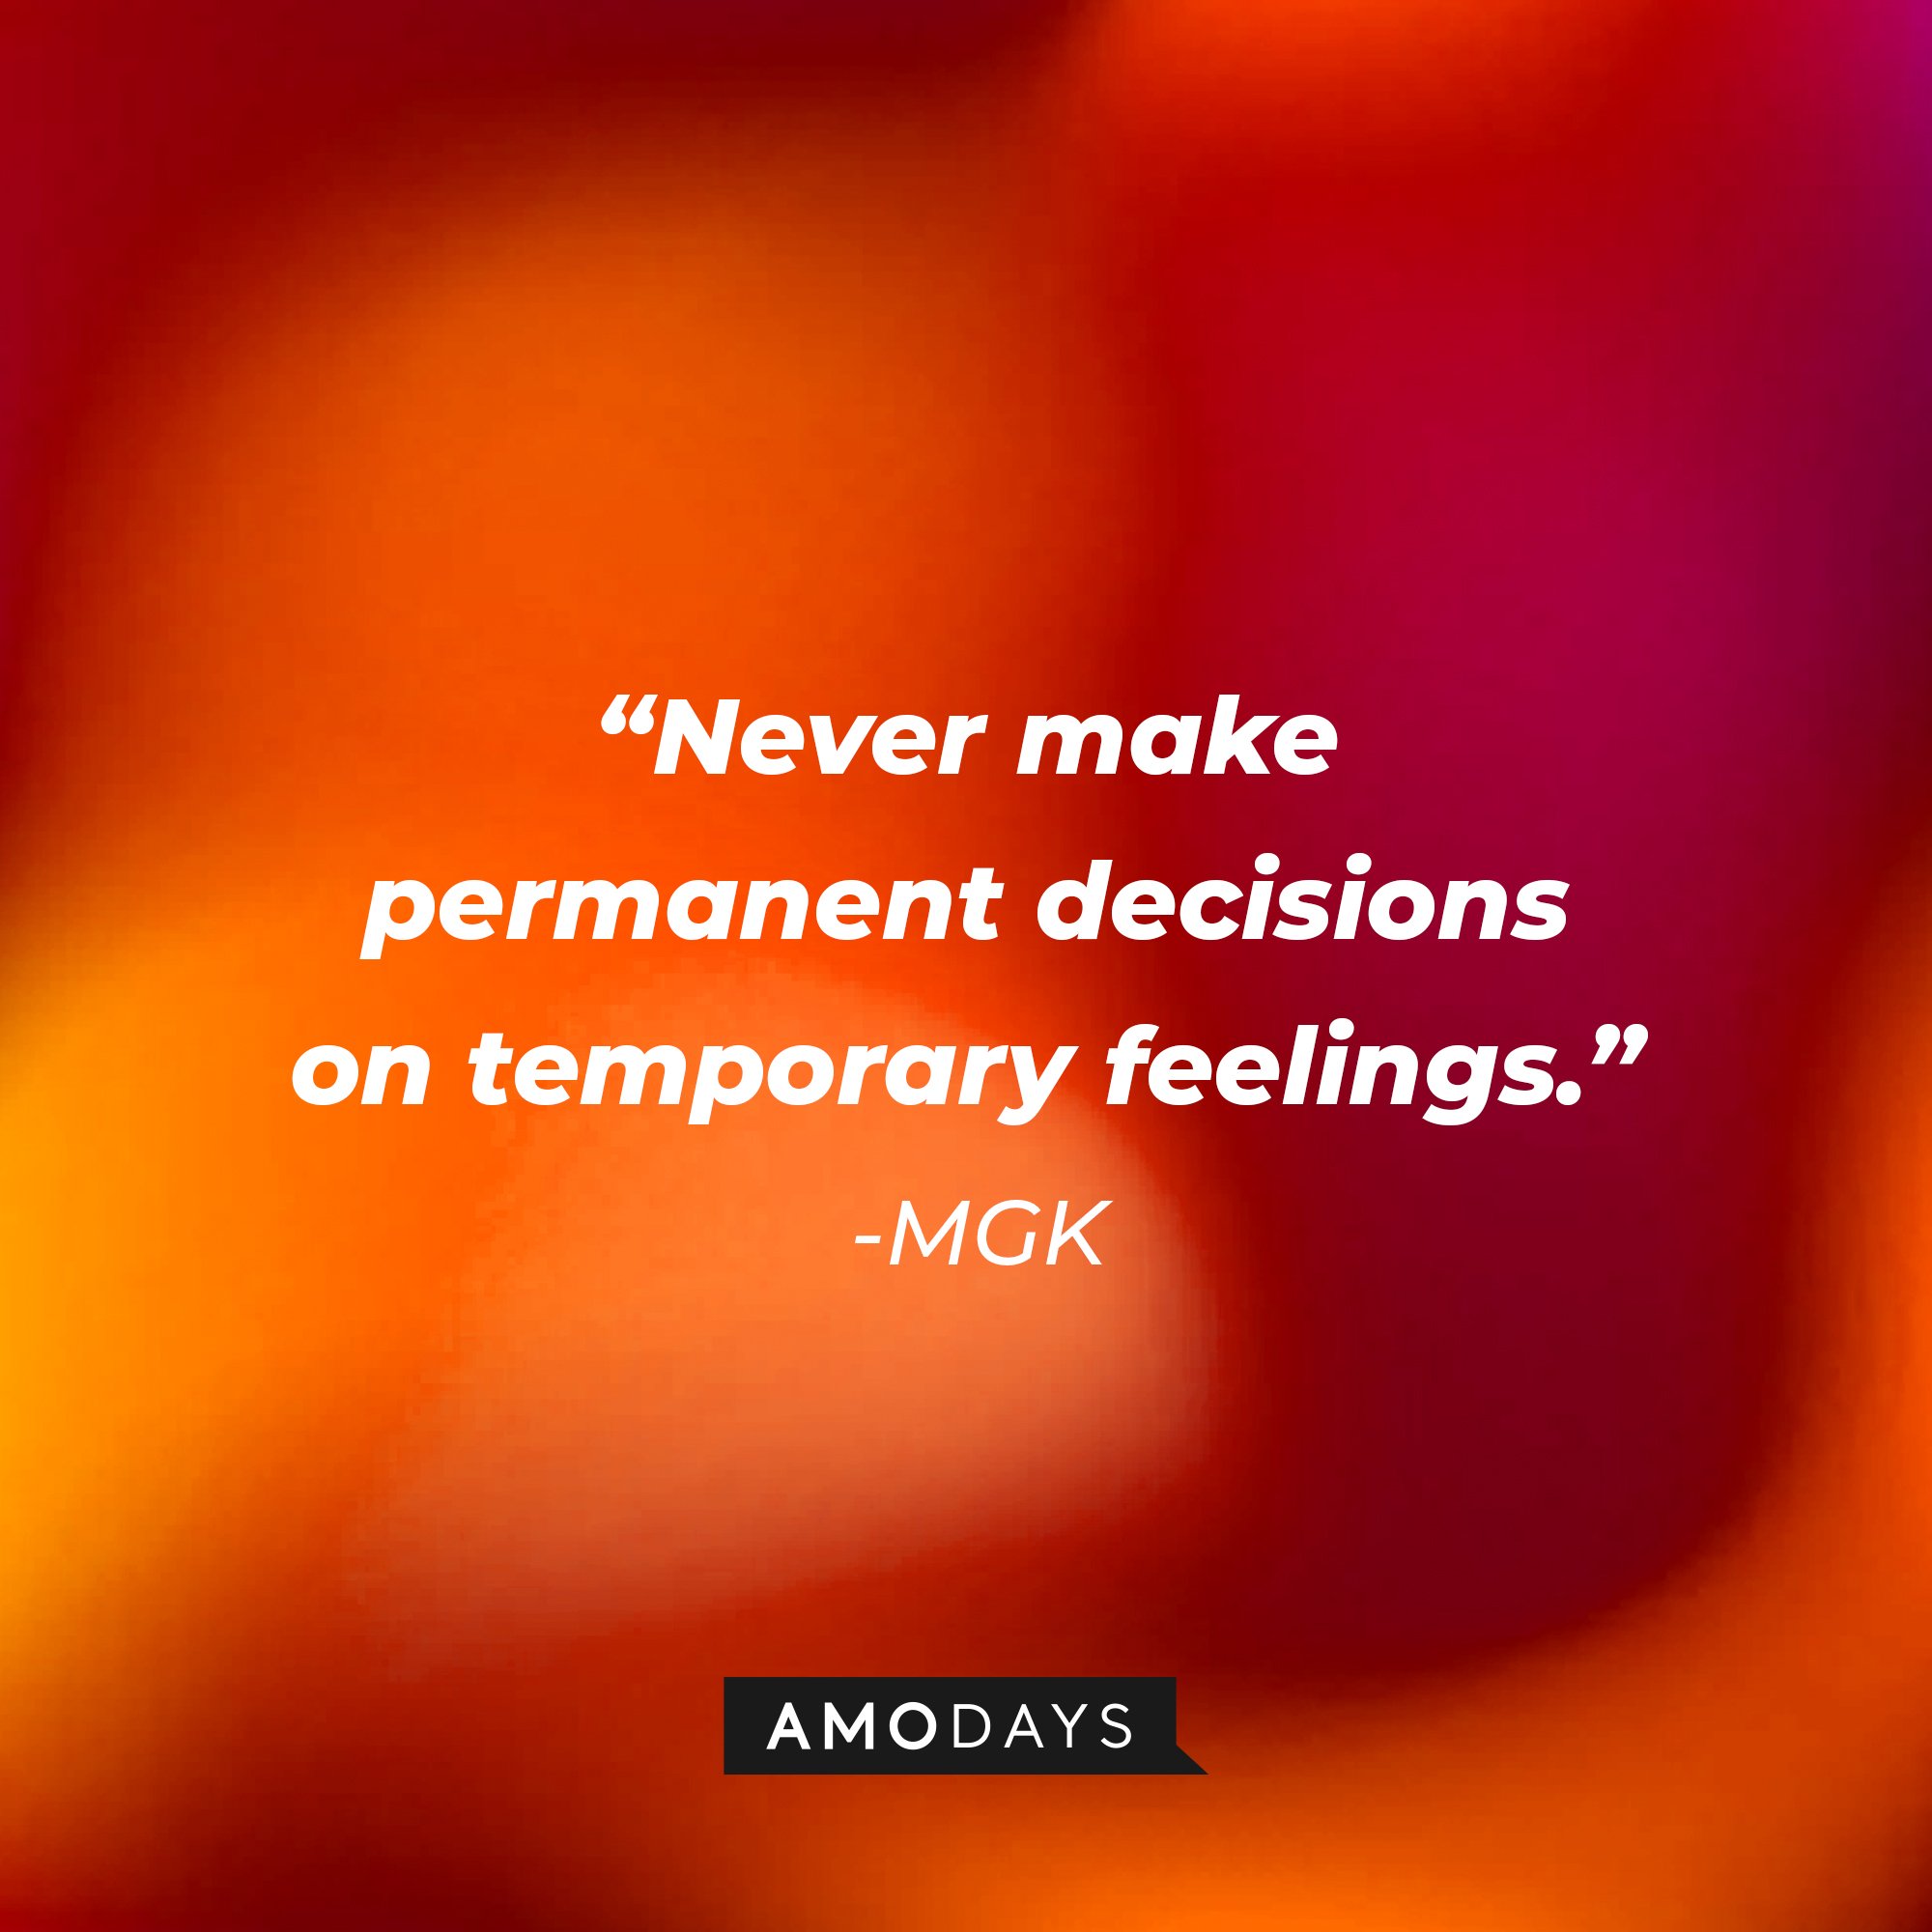 MGK's quote: "Never make permanent decisions on temporary feelings." | Image: AmoDays